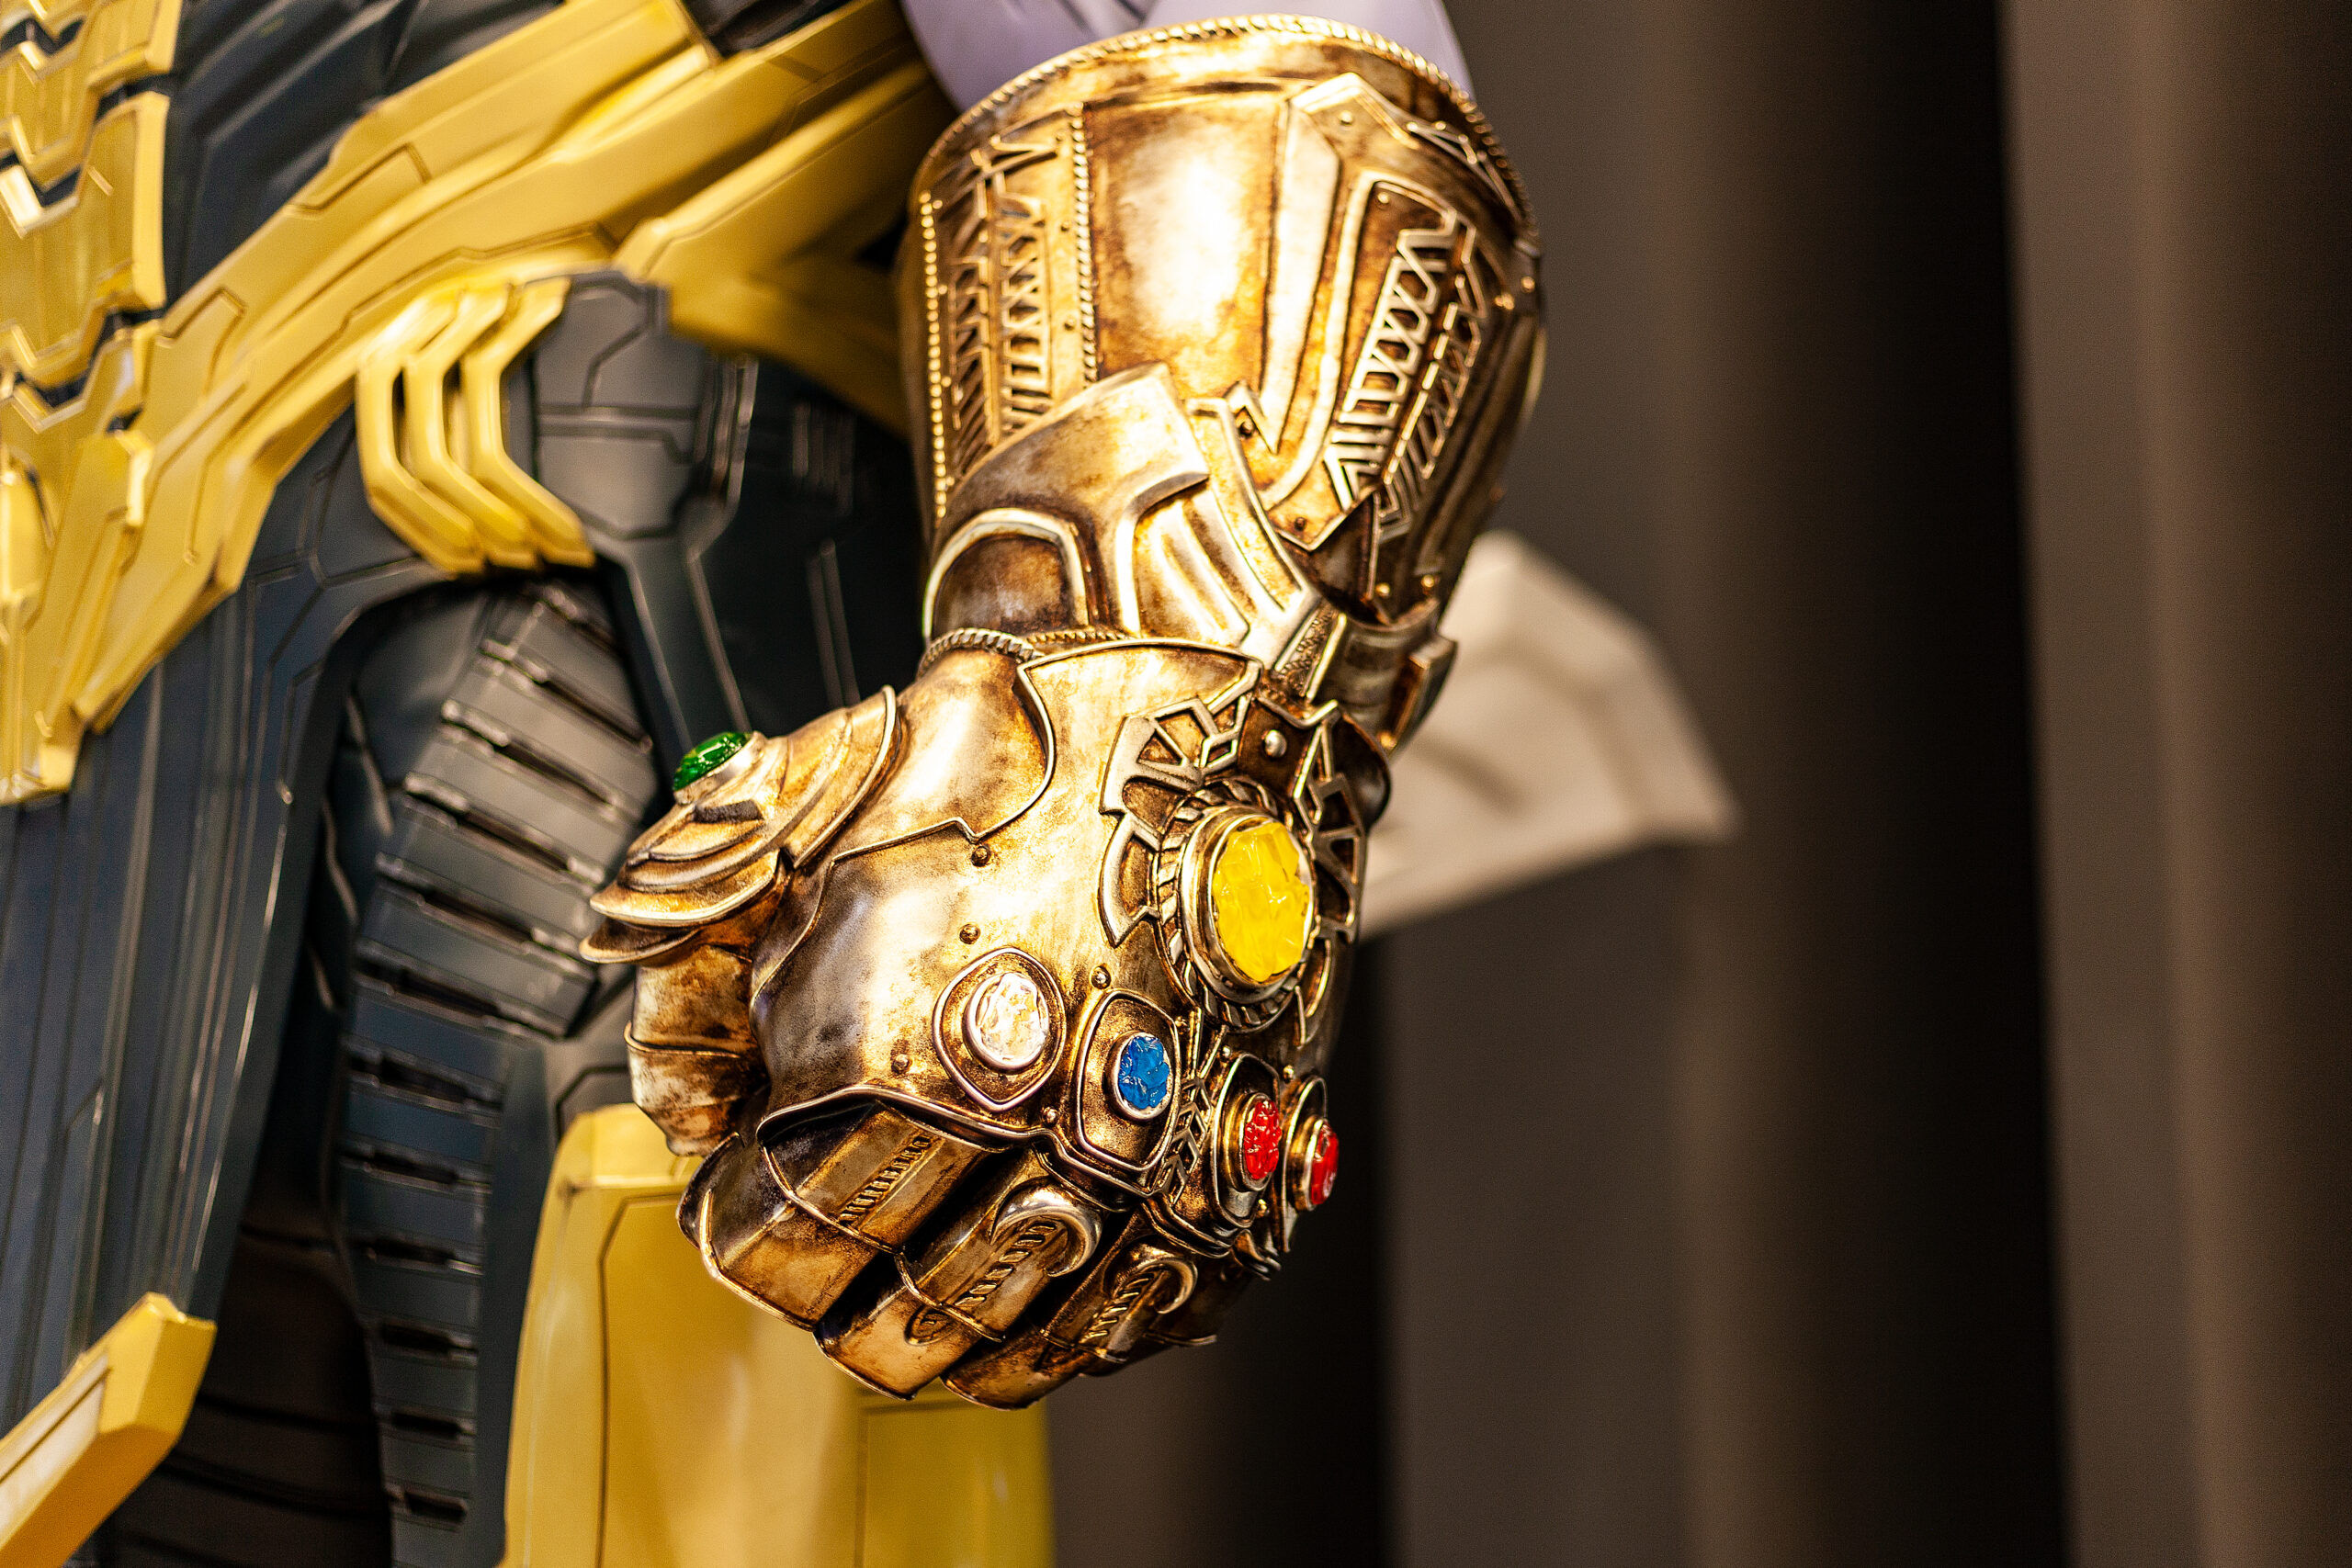 May 2019: Сlose-Up Of Thanos's Infinity Gauntlet. Huge Gold Glove With Infinity Gems. Thanos